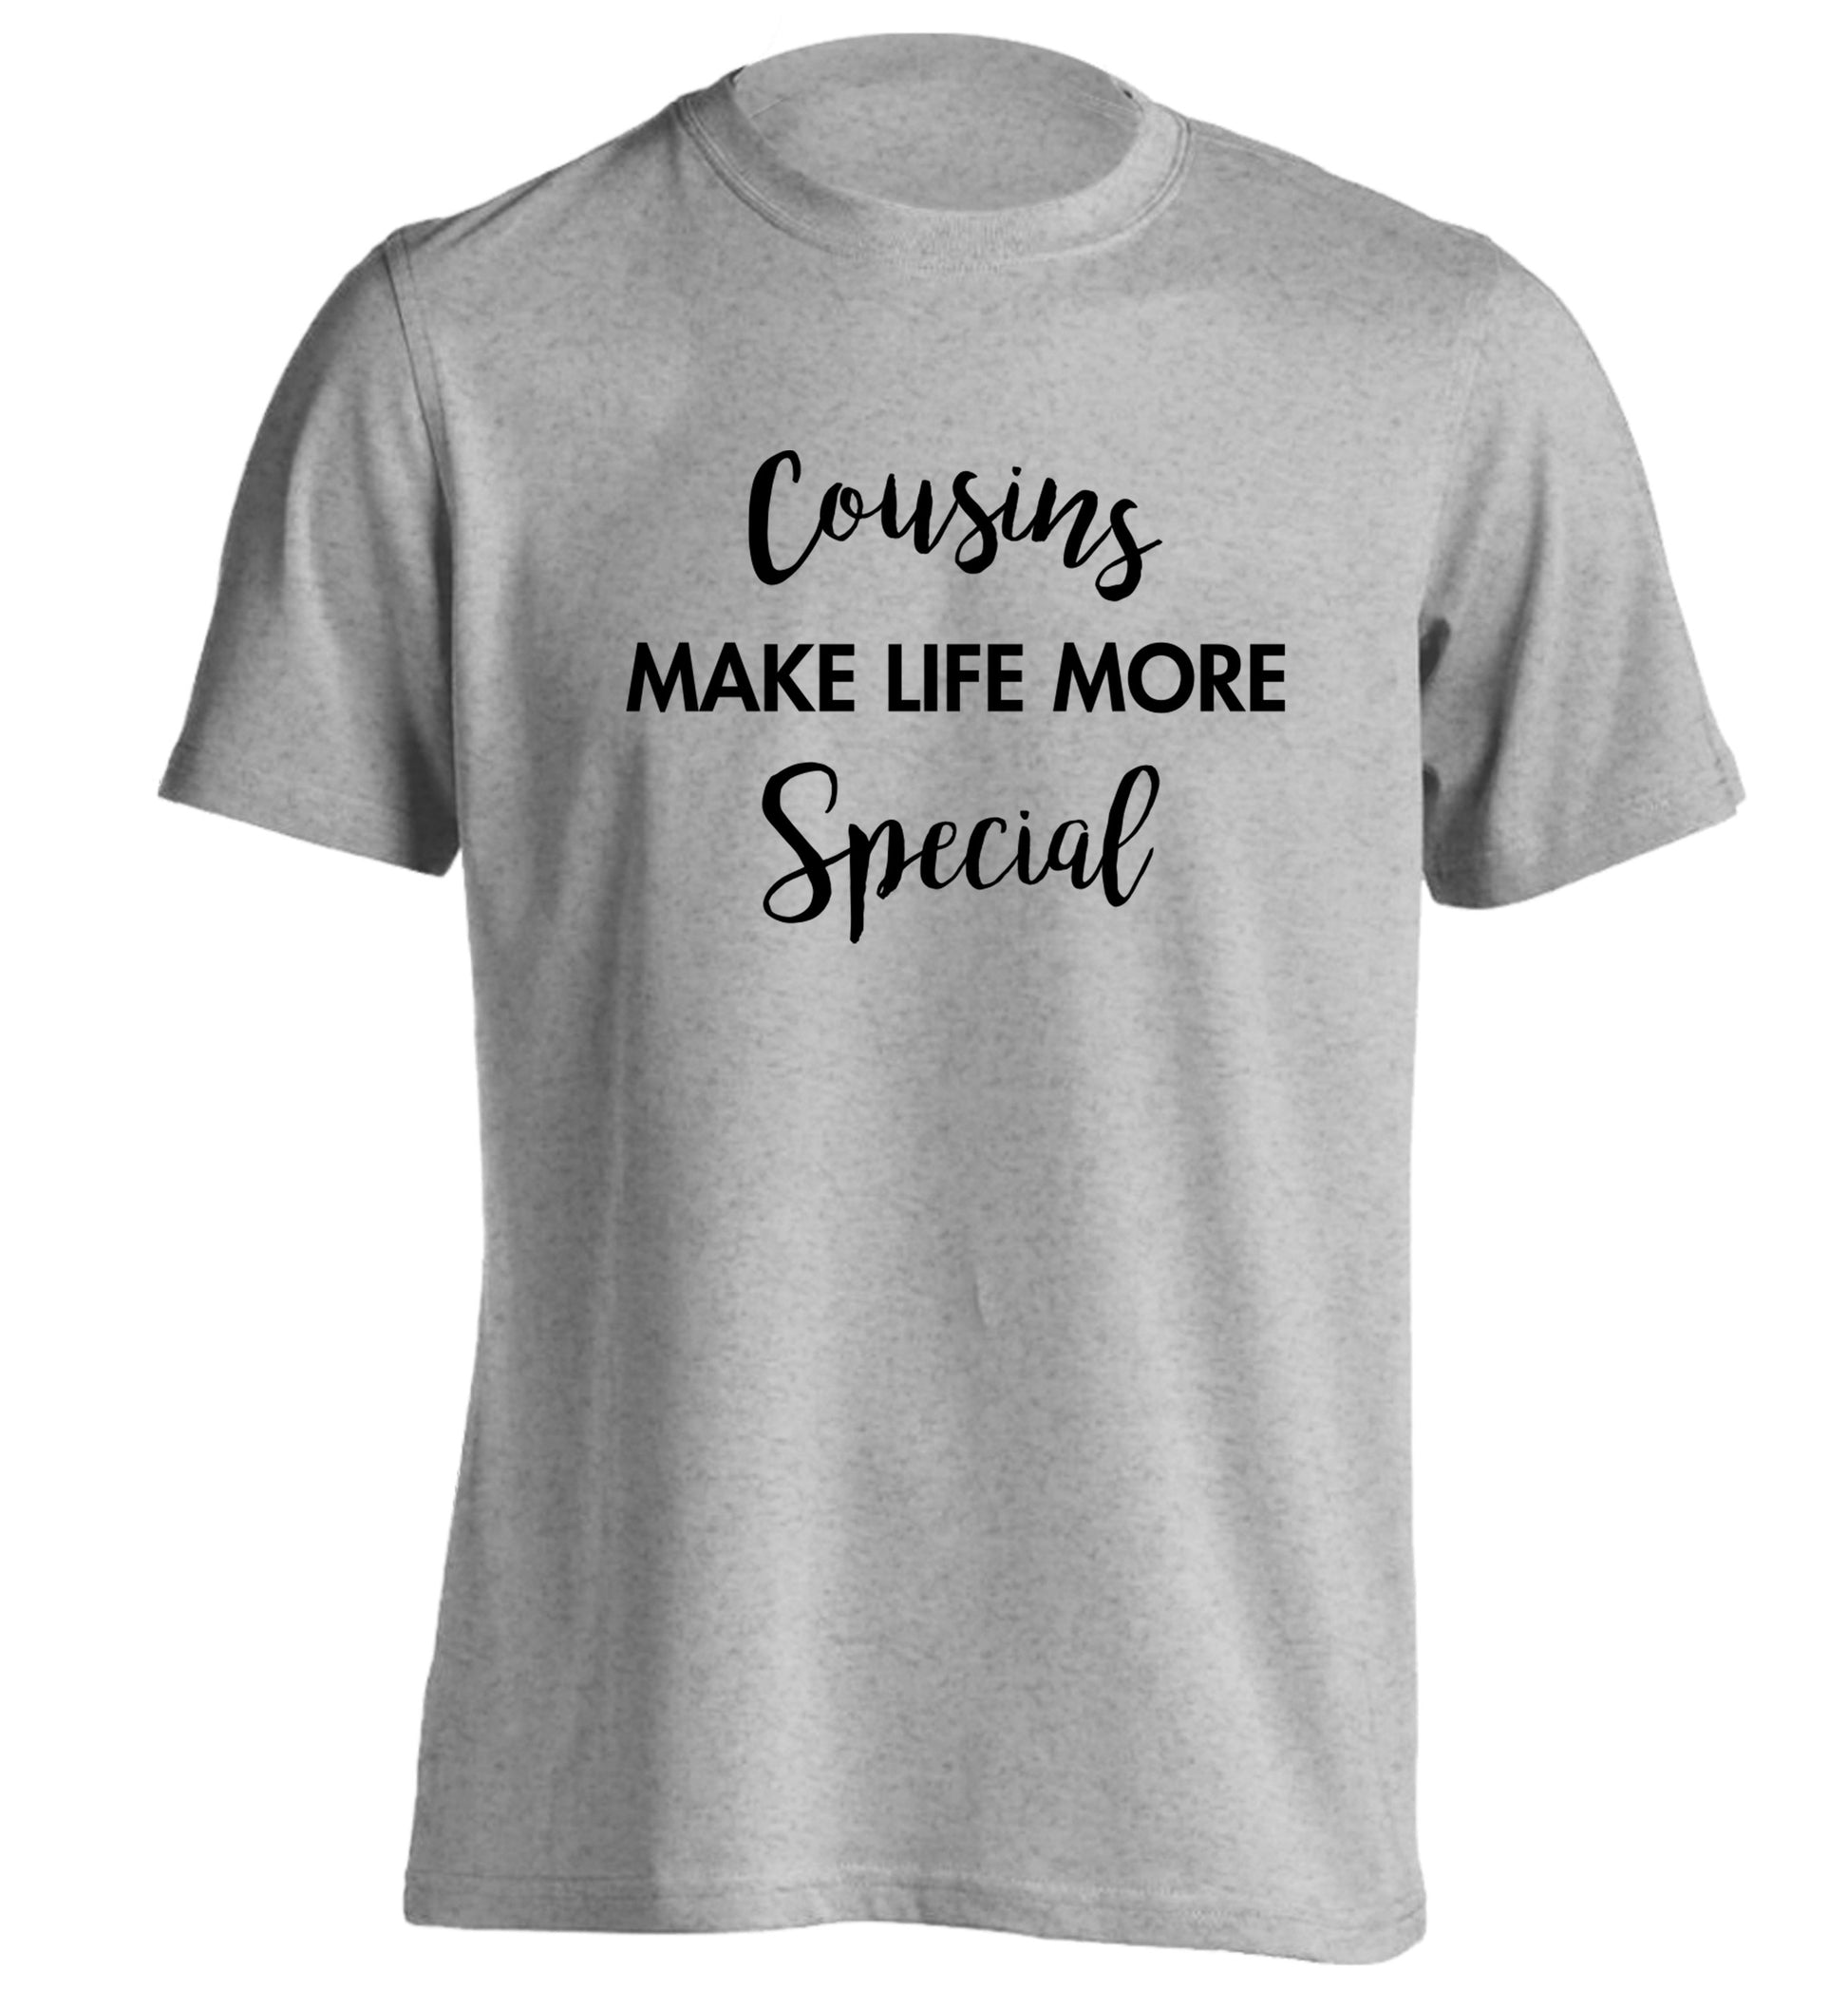 Cousins make life more special adults unisex grey Tshirt 2XL